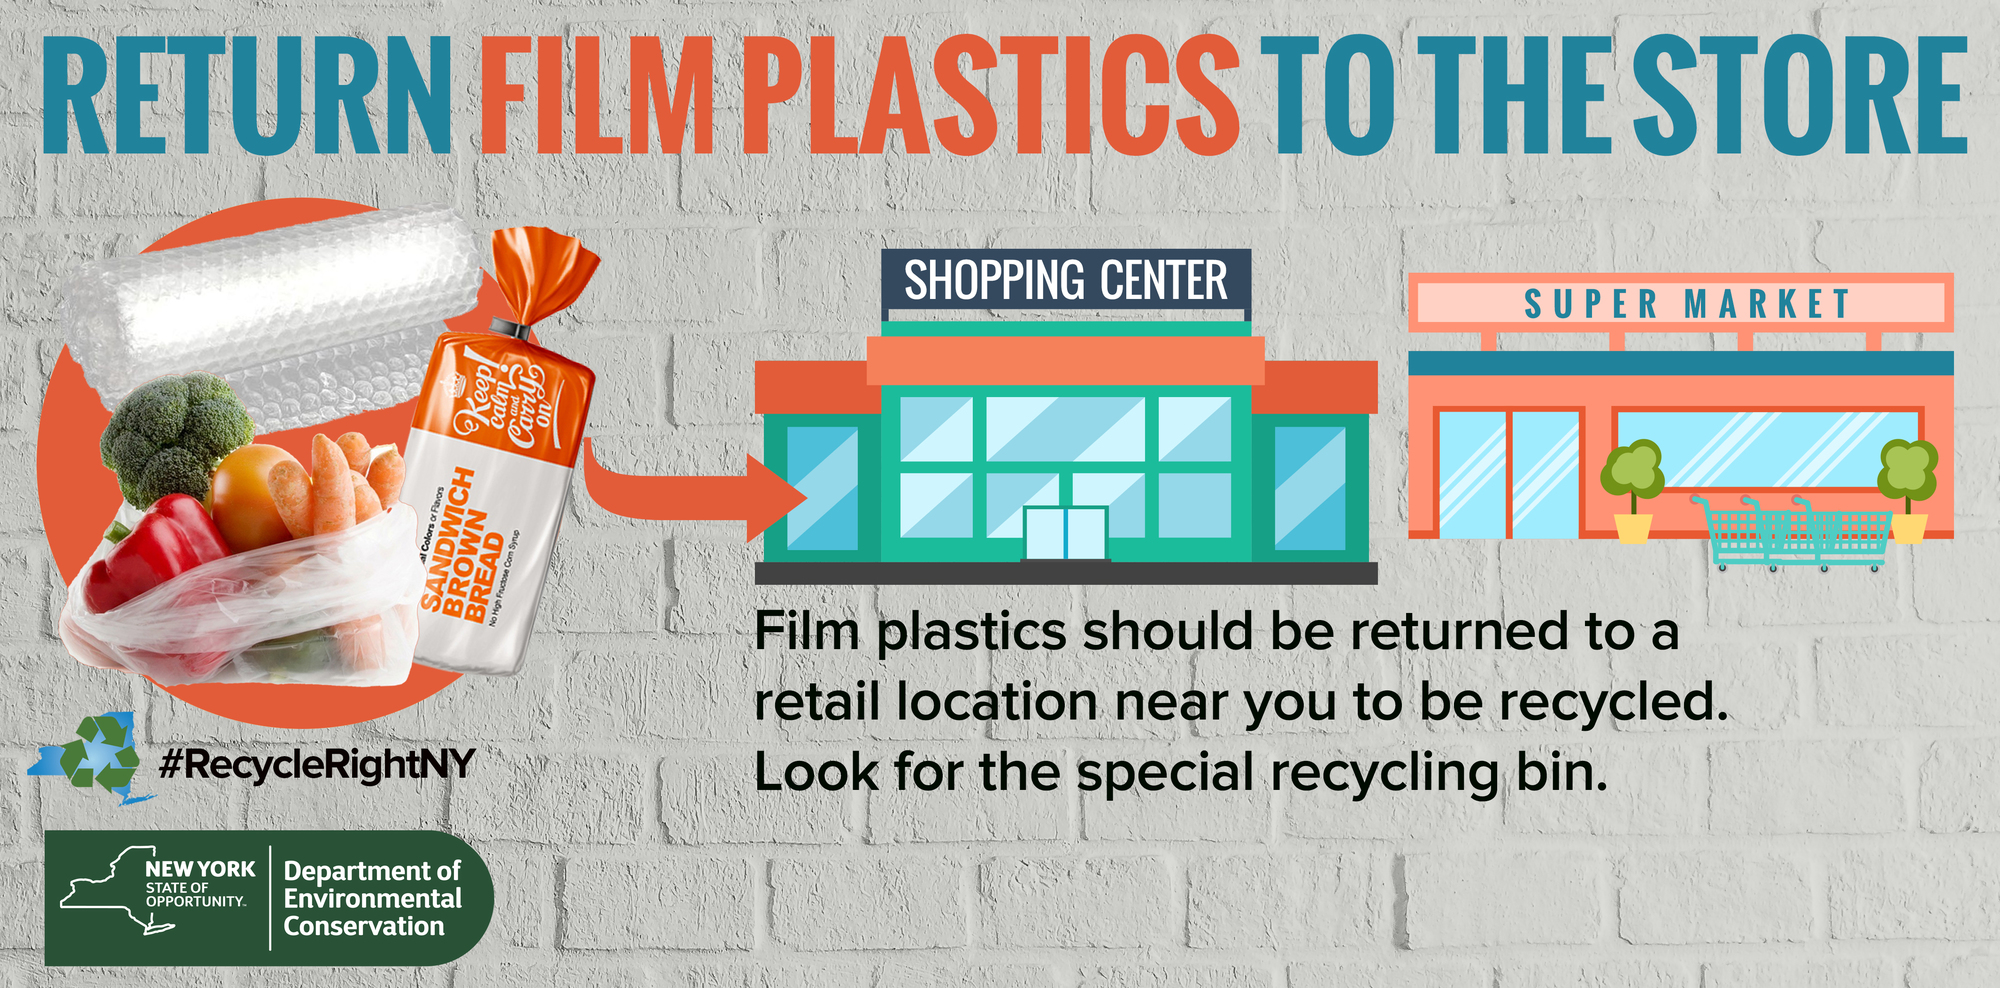 Image showing to return qualifying film plastics to retail stores for recycling 